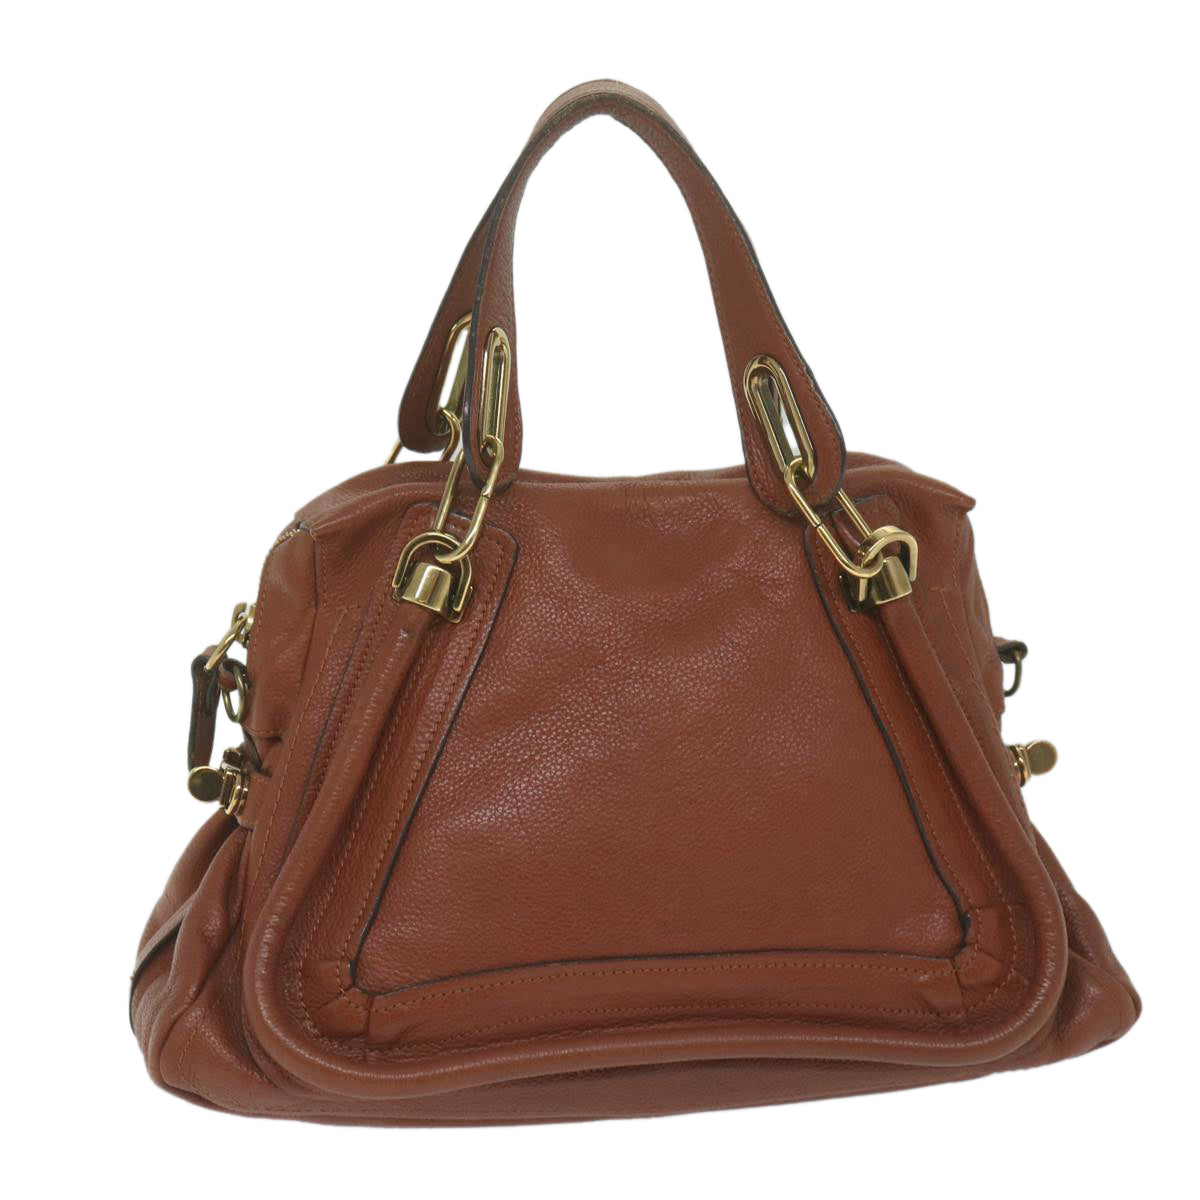 Chloe Paraty Hand Bag Leather Brown Auth yk10020